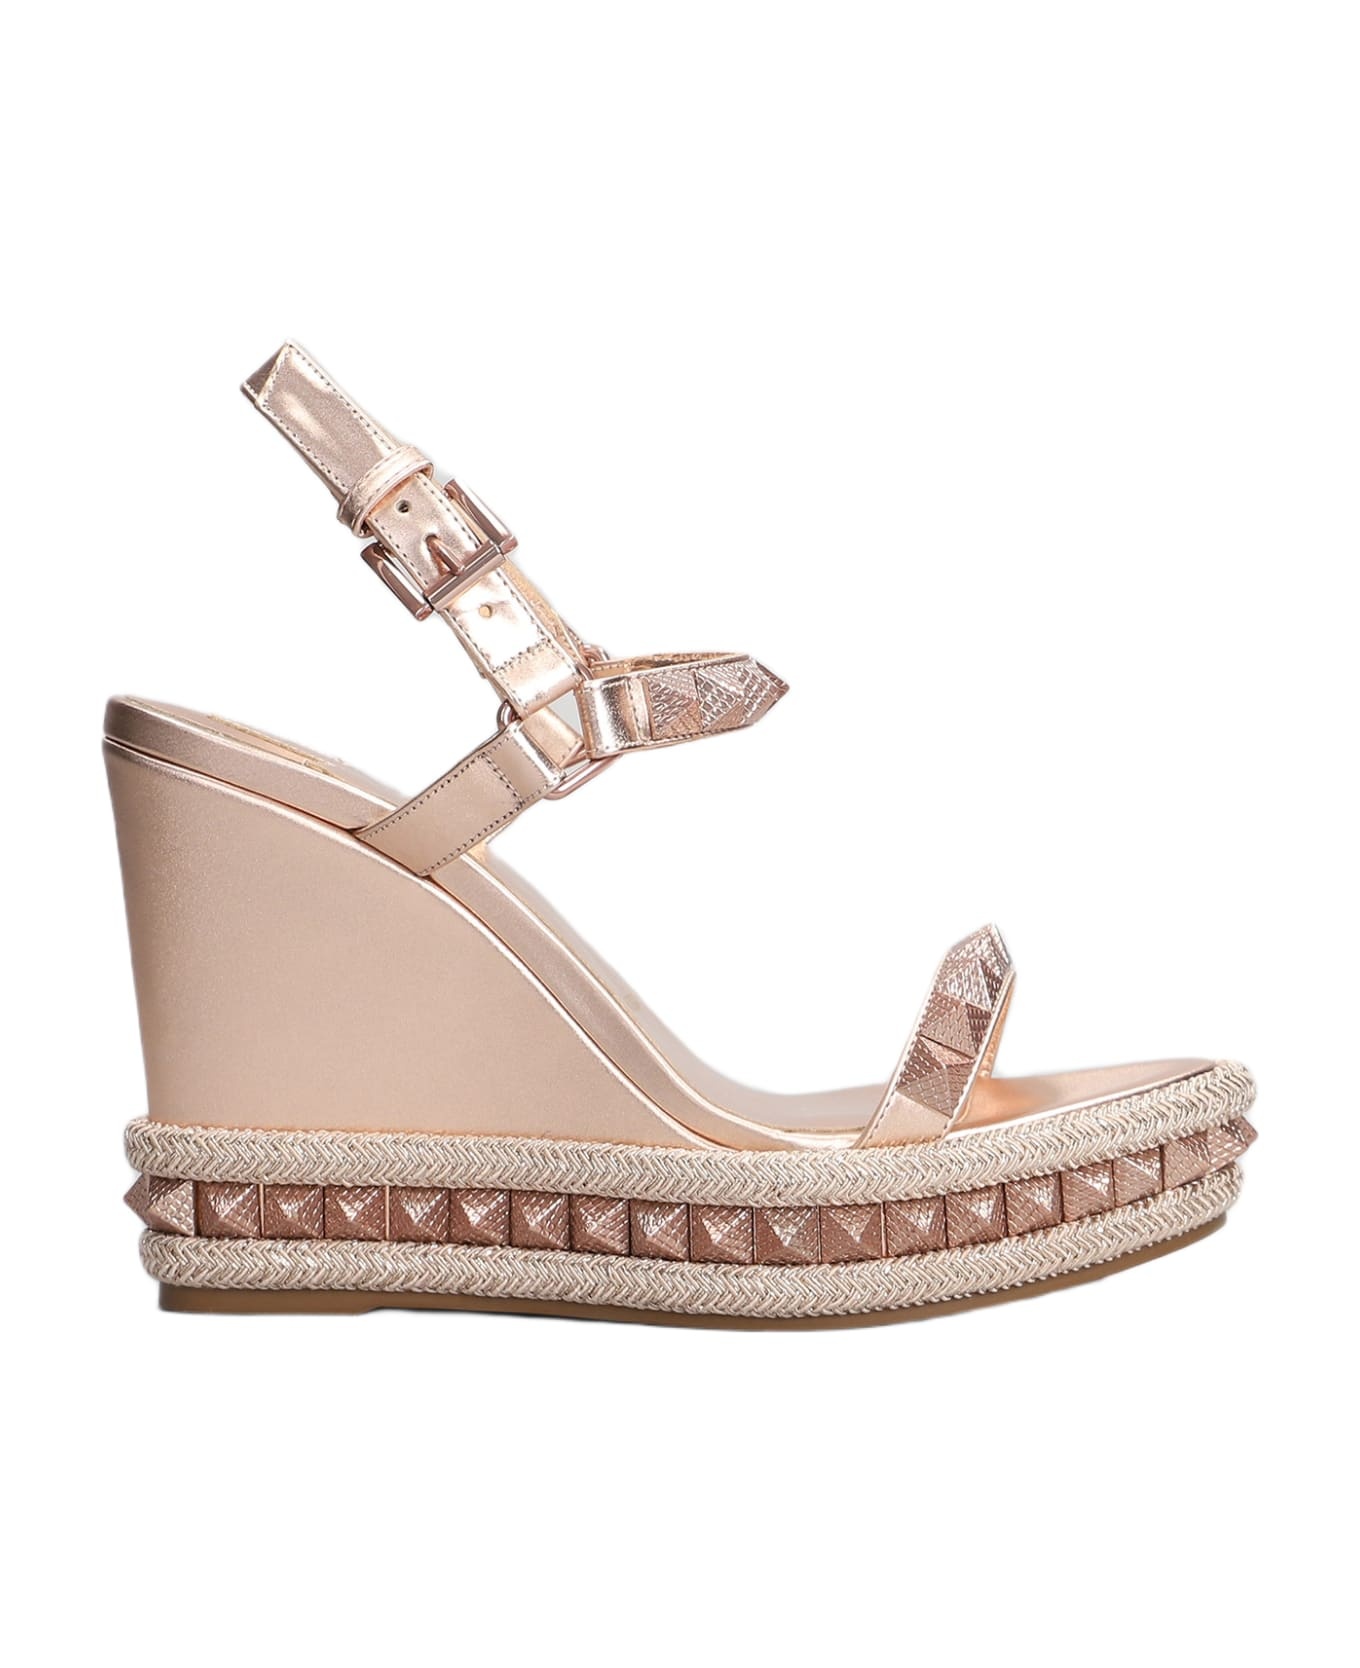 Pyraclou 110 Sandals In Rose-pink Leather - 1